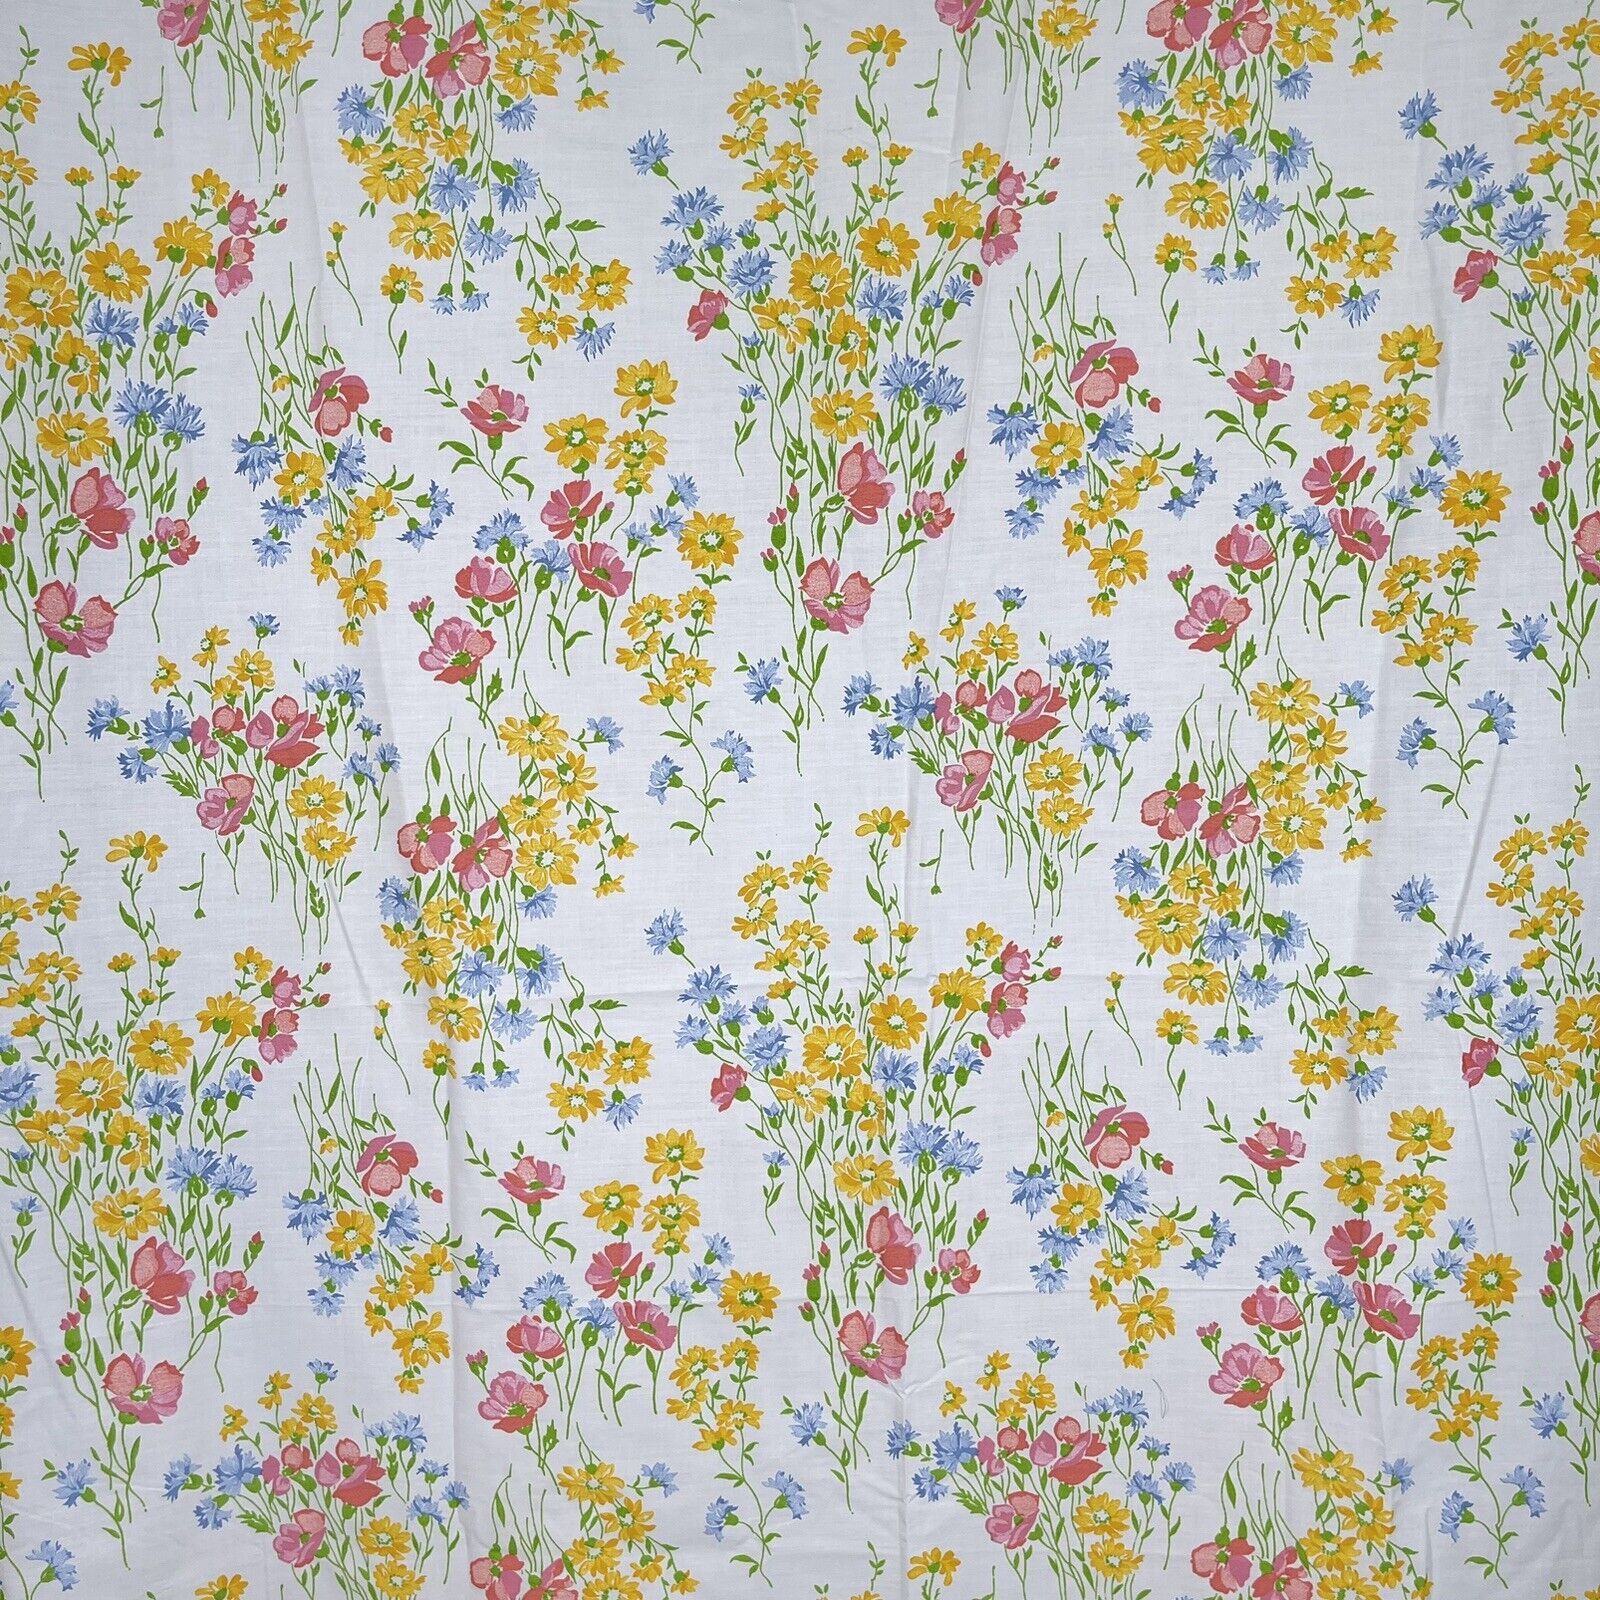 VTG Cannon Royal Family Floral Sheet Twin Flat Pink Yellow Green Blue White NWOT